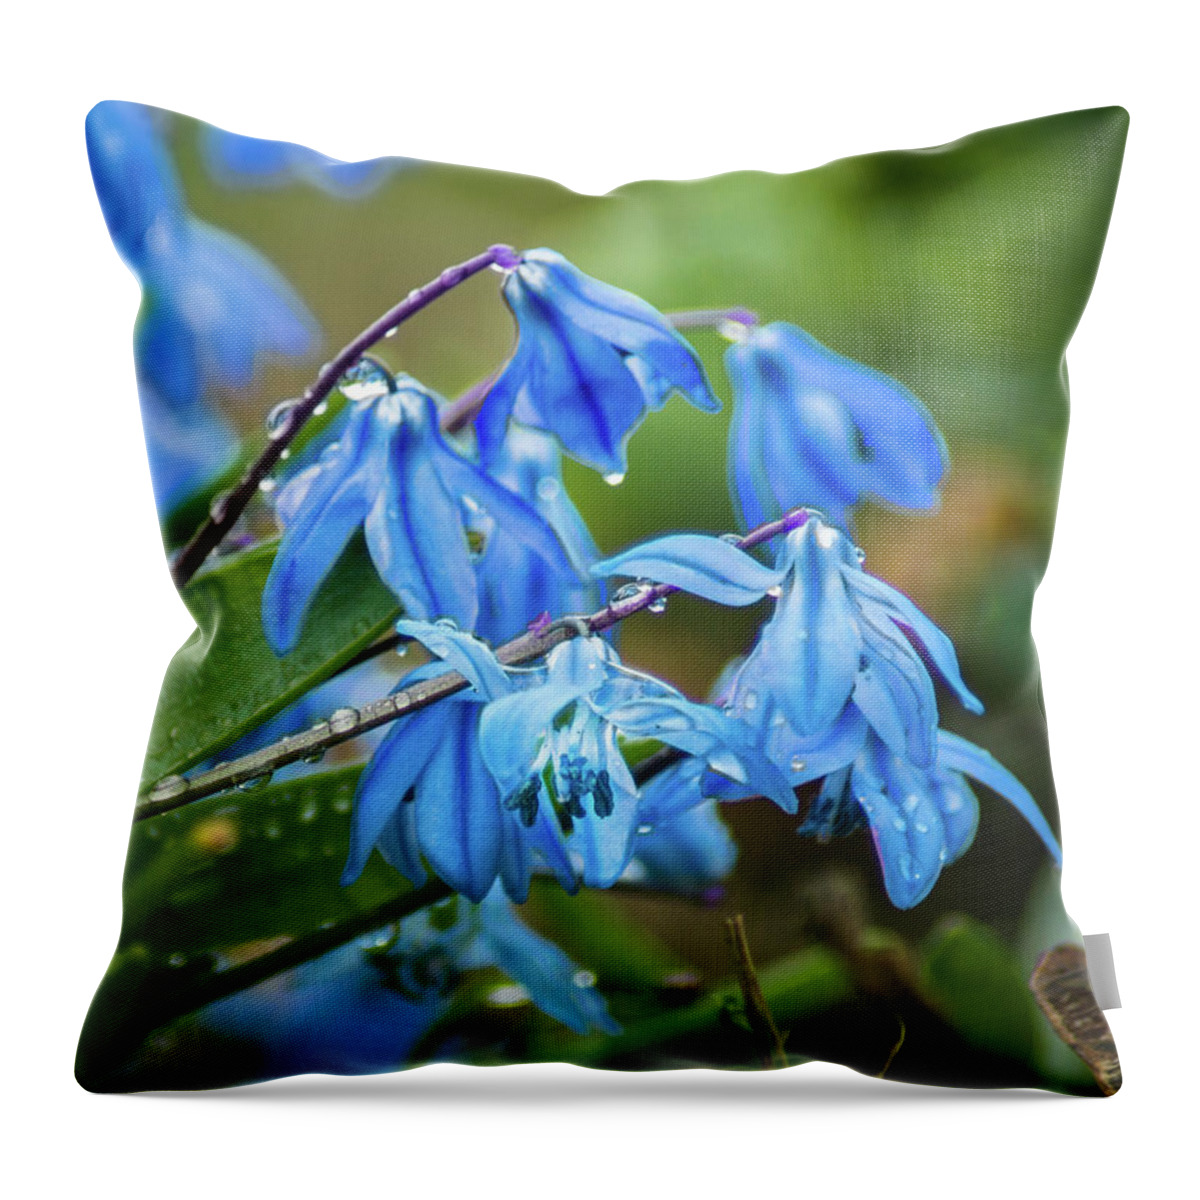 Blue Throw Pillow featuring the photograph A Wet Spring by Bill Pevlor